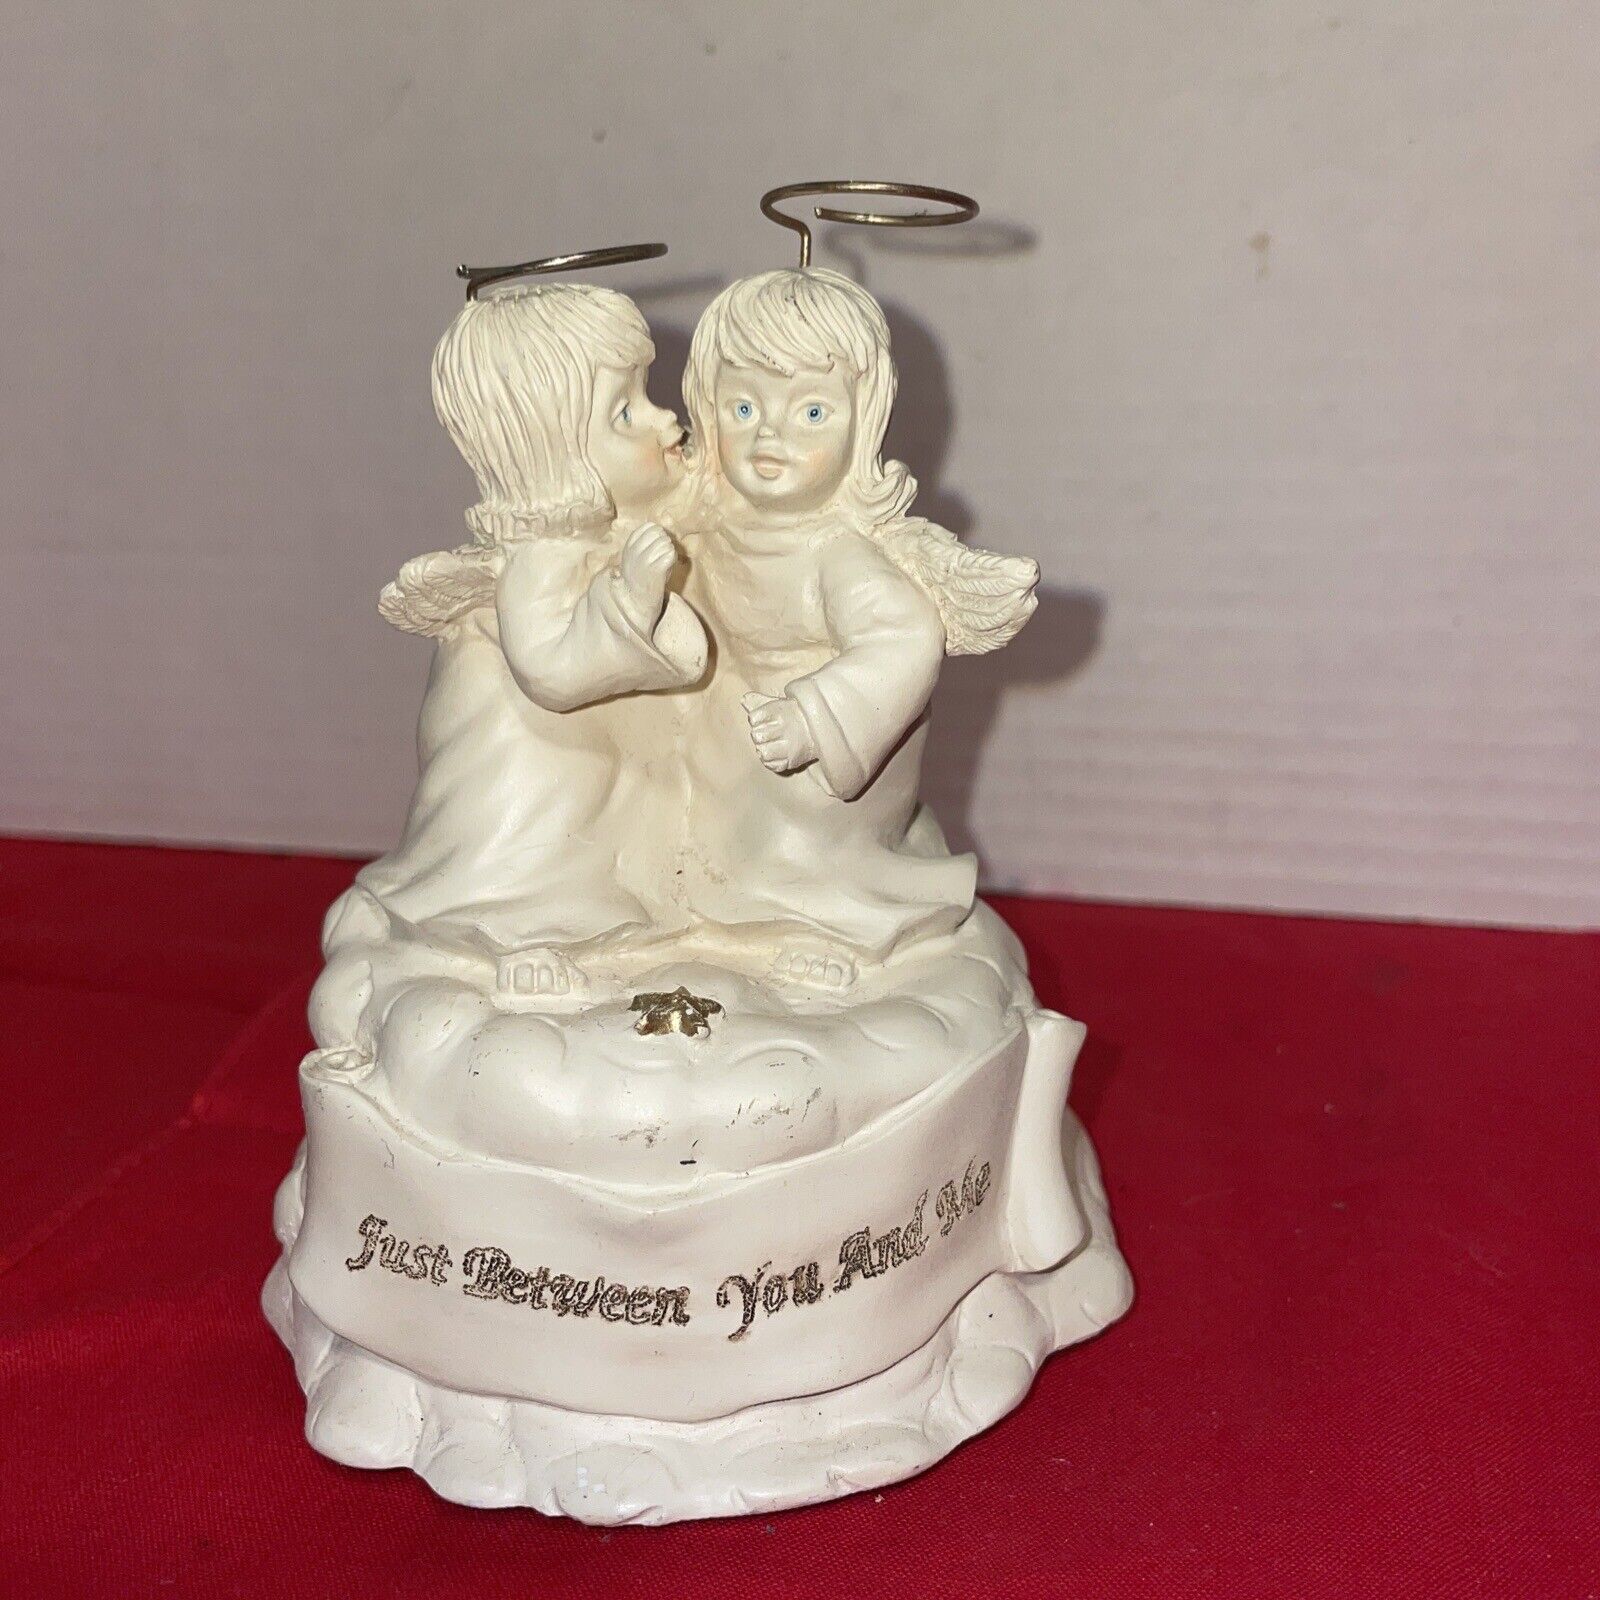 Angel Friends Turning MUSIC BOX GENMORE 1996-Plays “That’s What Friends Are For”